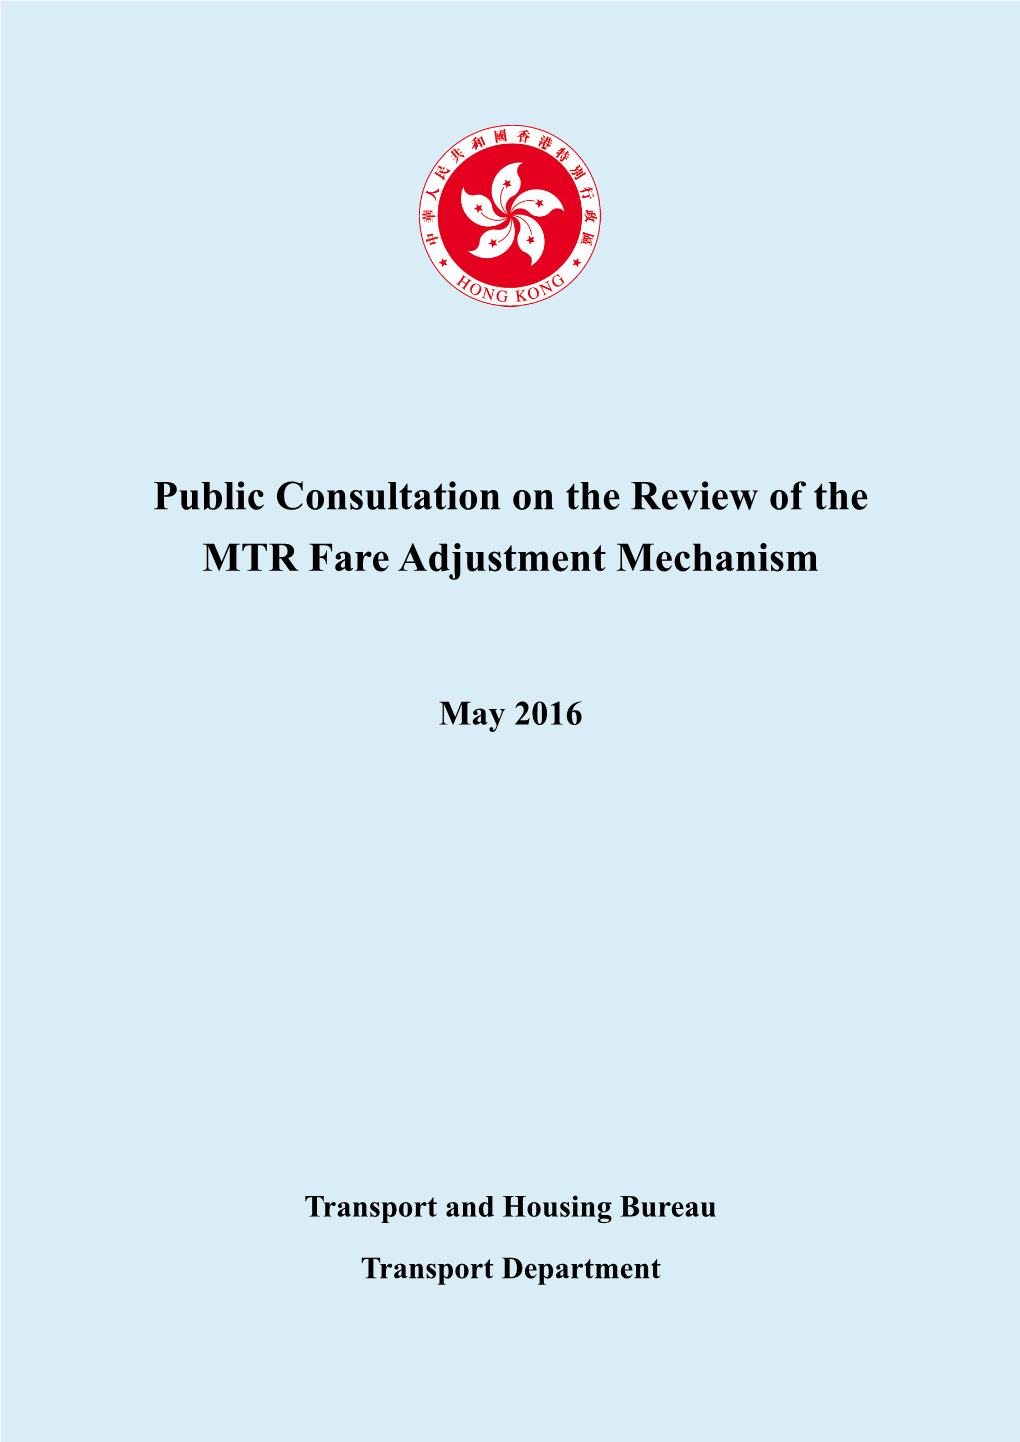 Review of the MTR Fare Adjustment Mechanism